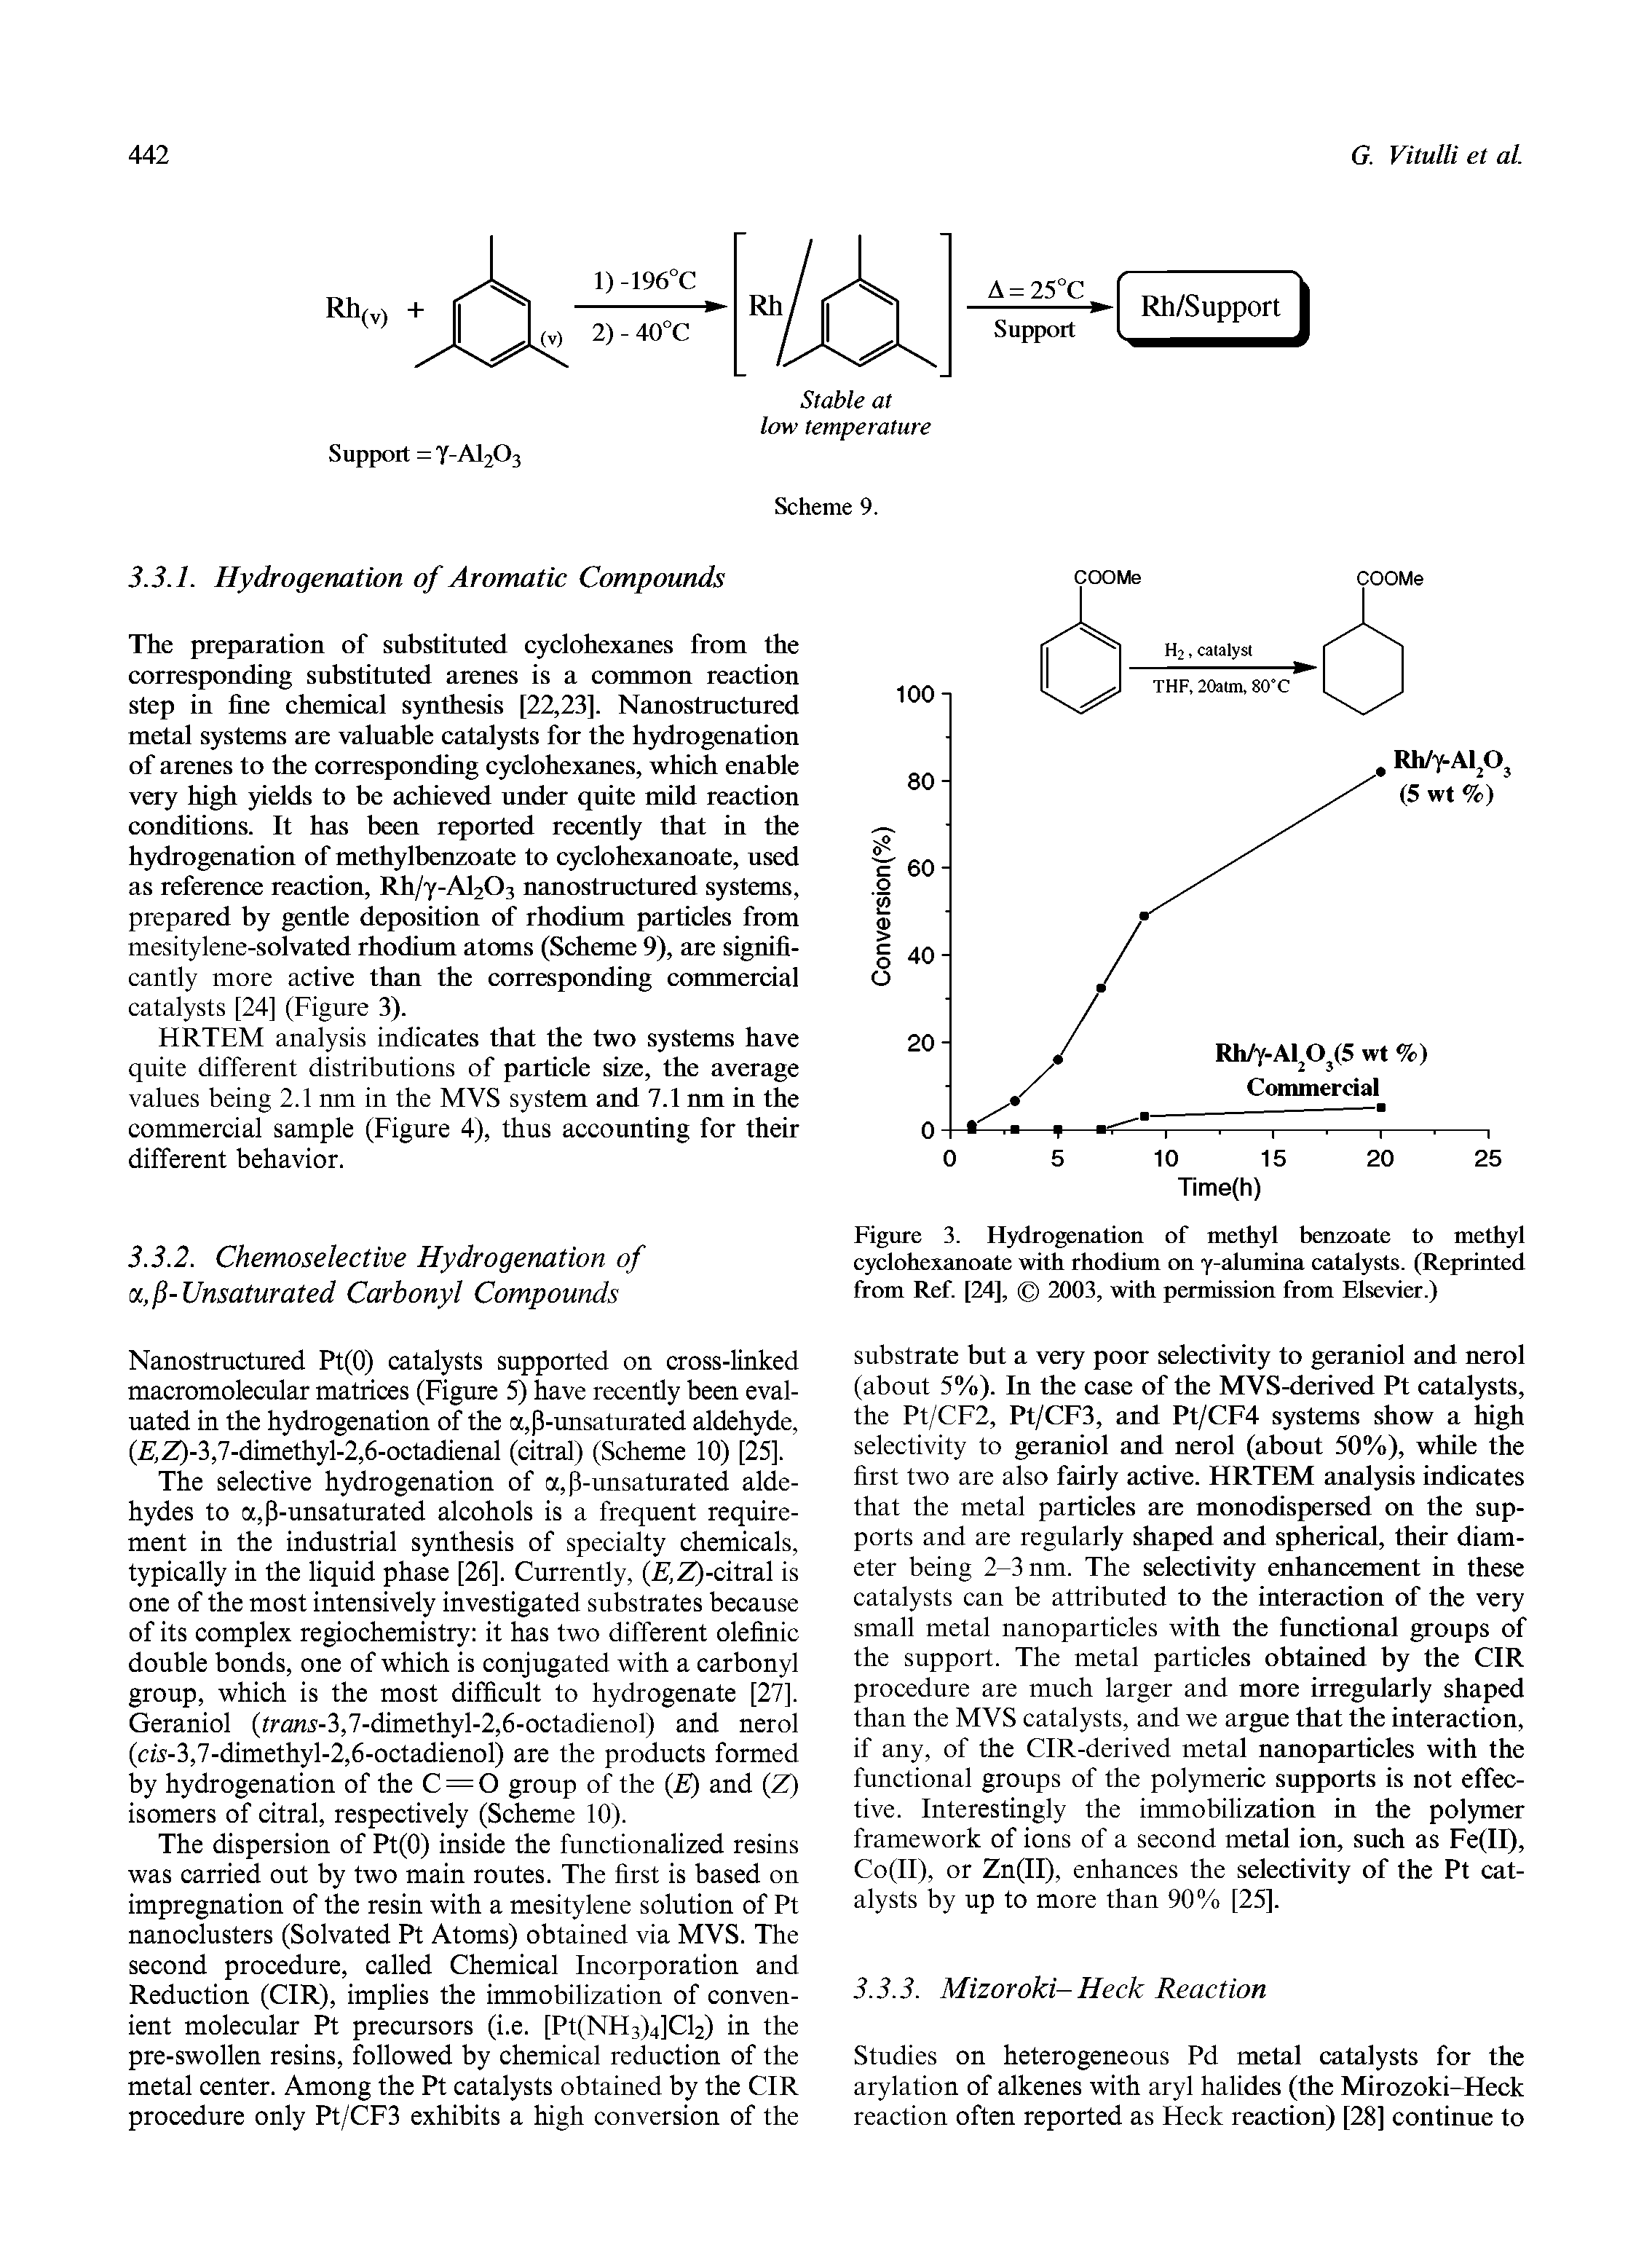 Figure 3. Hydrogenation of methyl benzoate to methyl cyclohexanoate with rhodium on y-alumina catalysts. (Reprinted from Ref. [24], 2003, with permission from Elsevier.)...